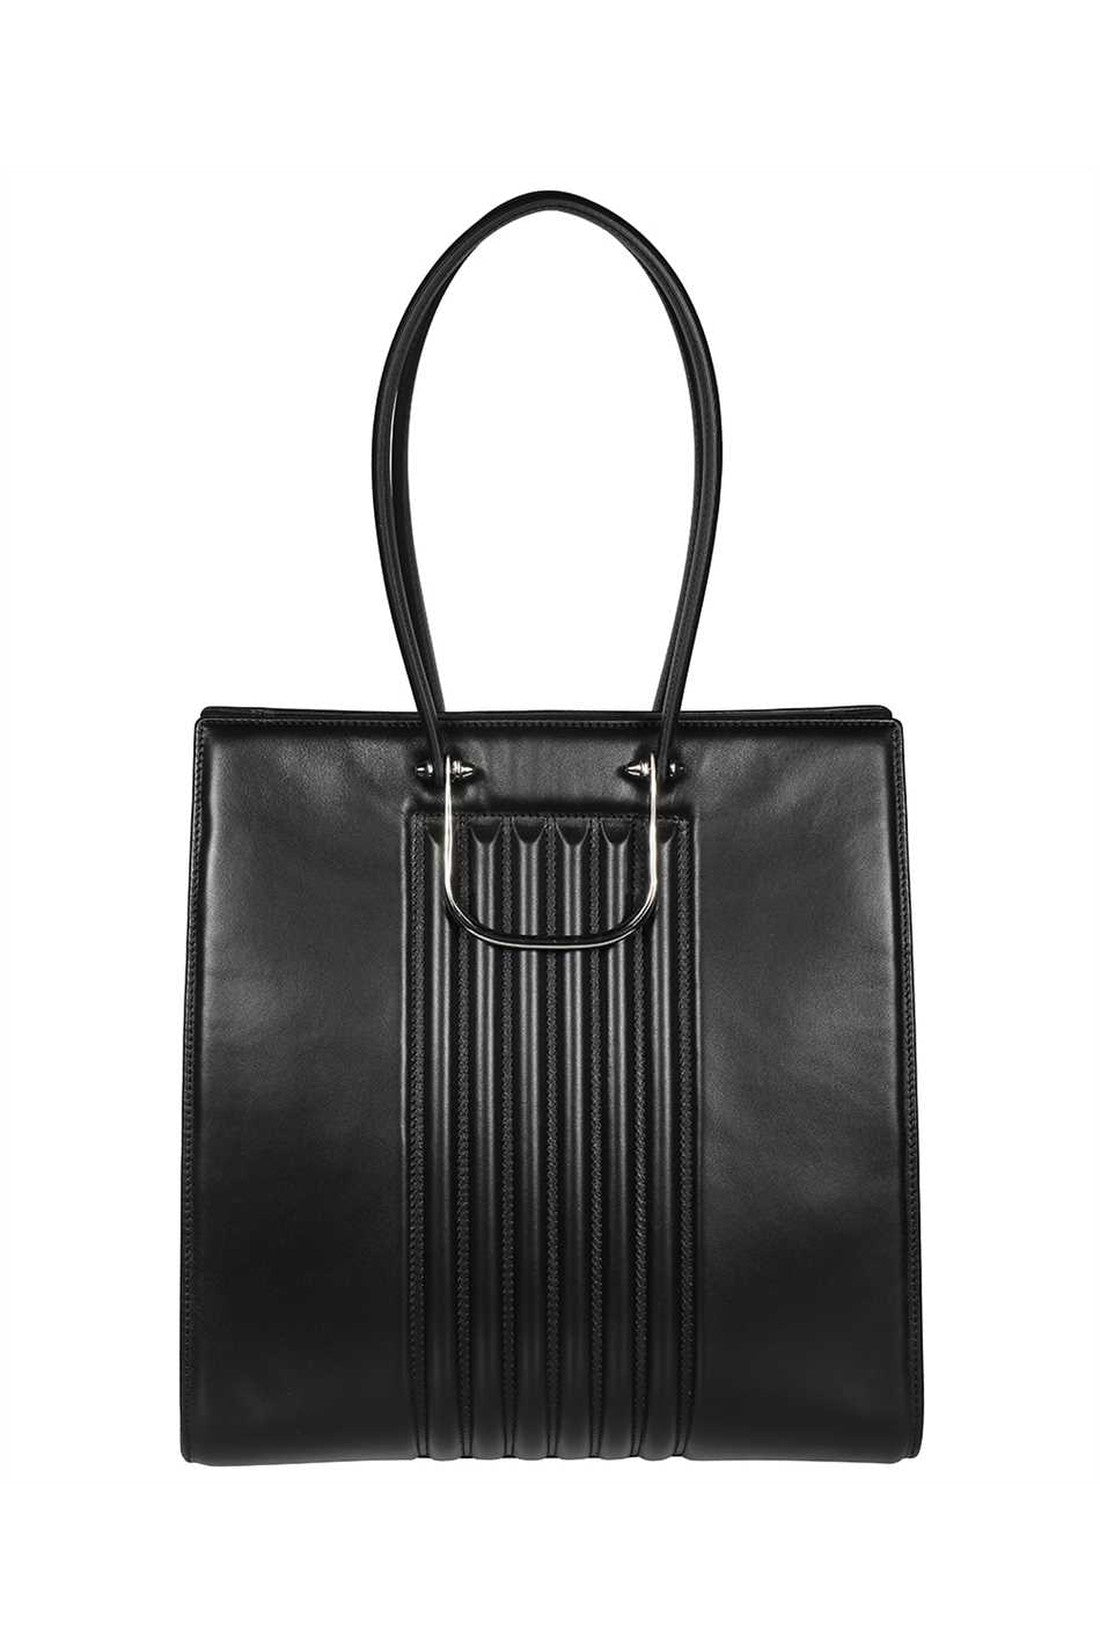 The Tall Story leather bag